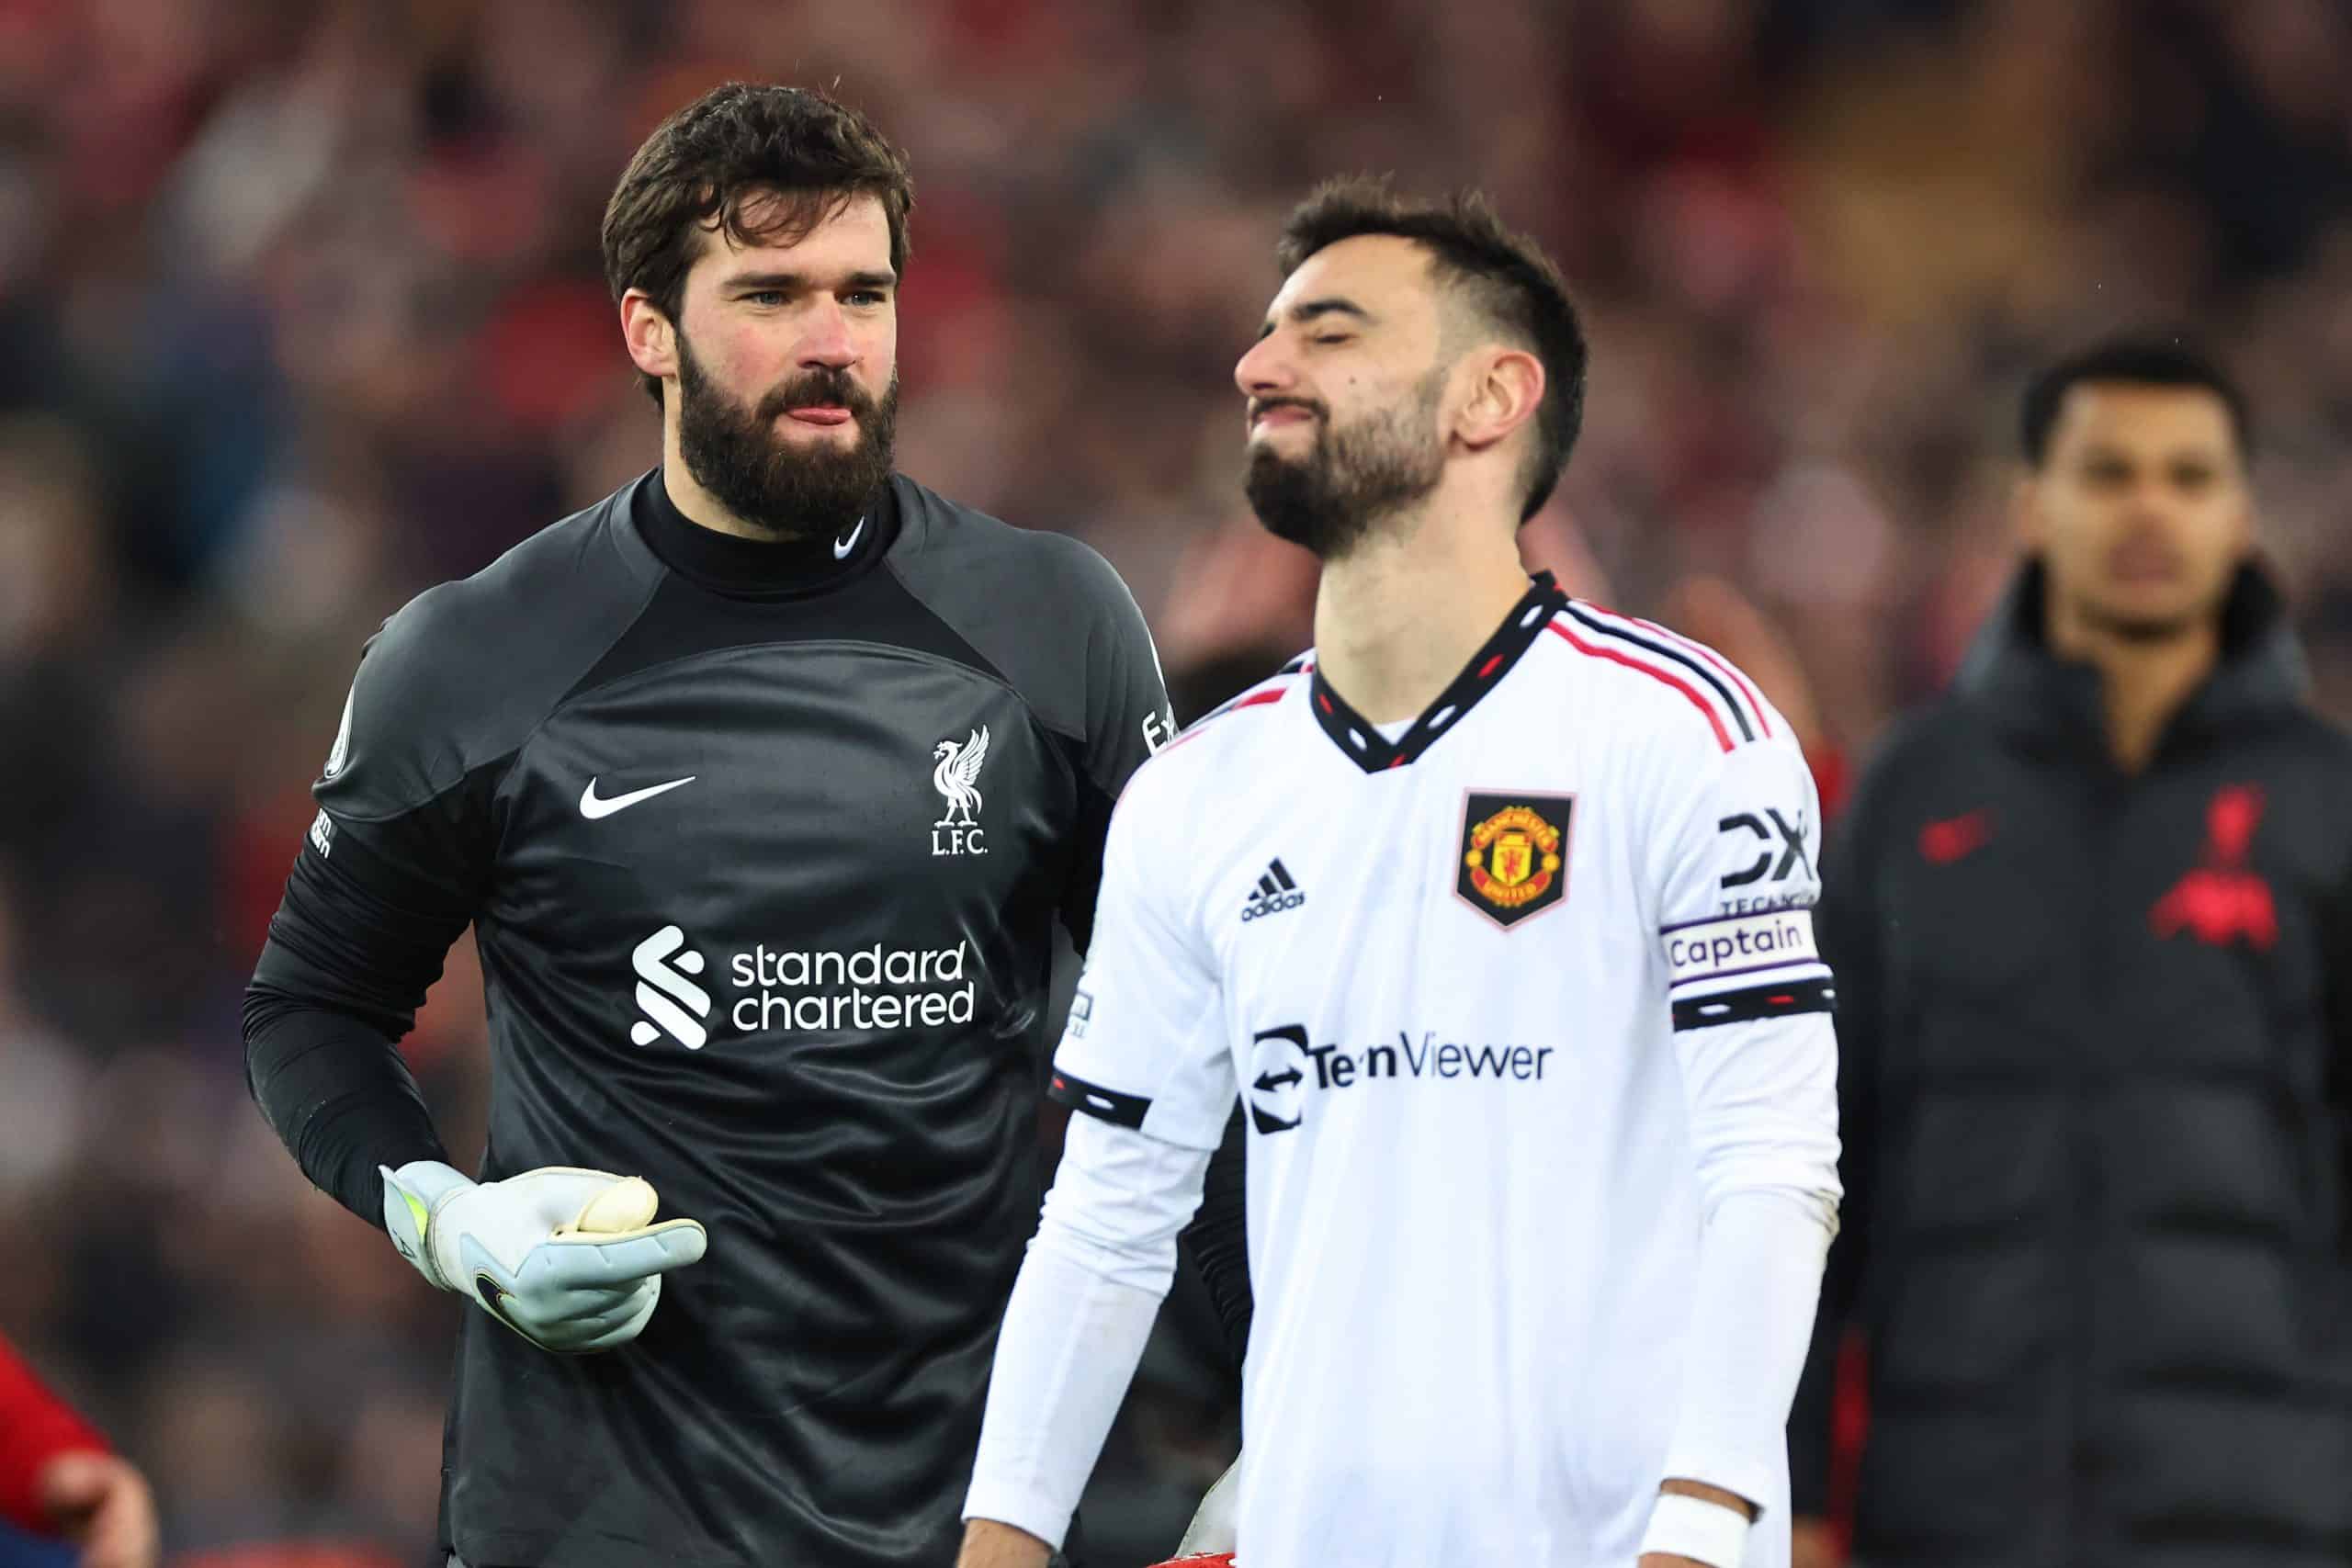 Liverpool: Bruno Fernandes Reveals Why Man United Was Beaten 7-0 At Anfield